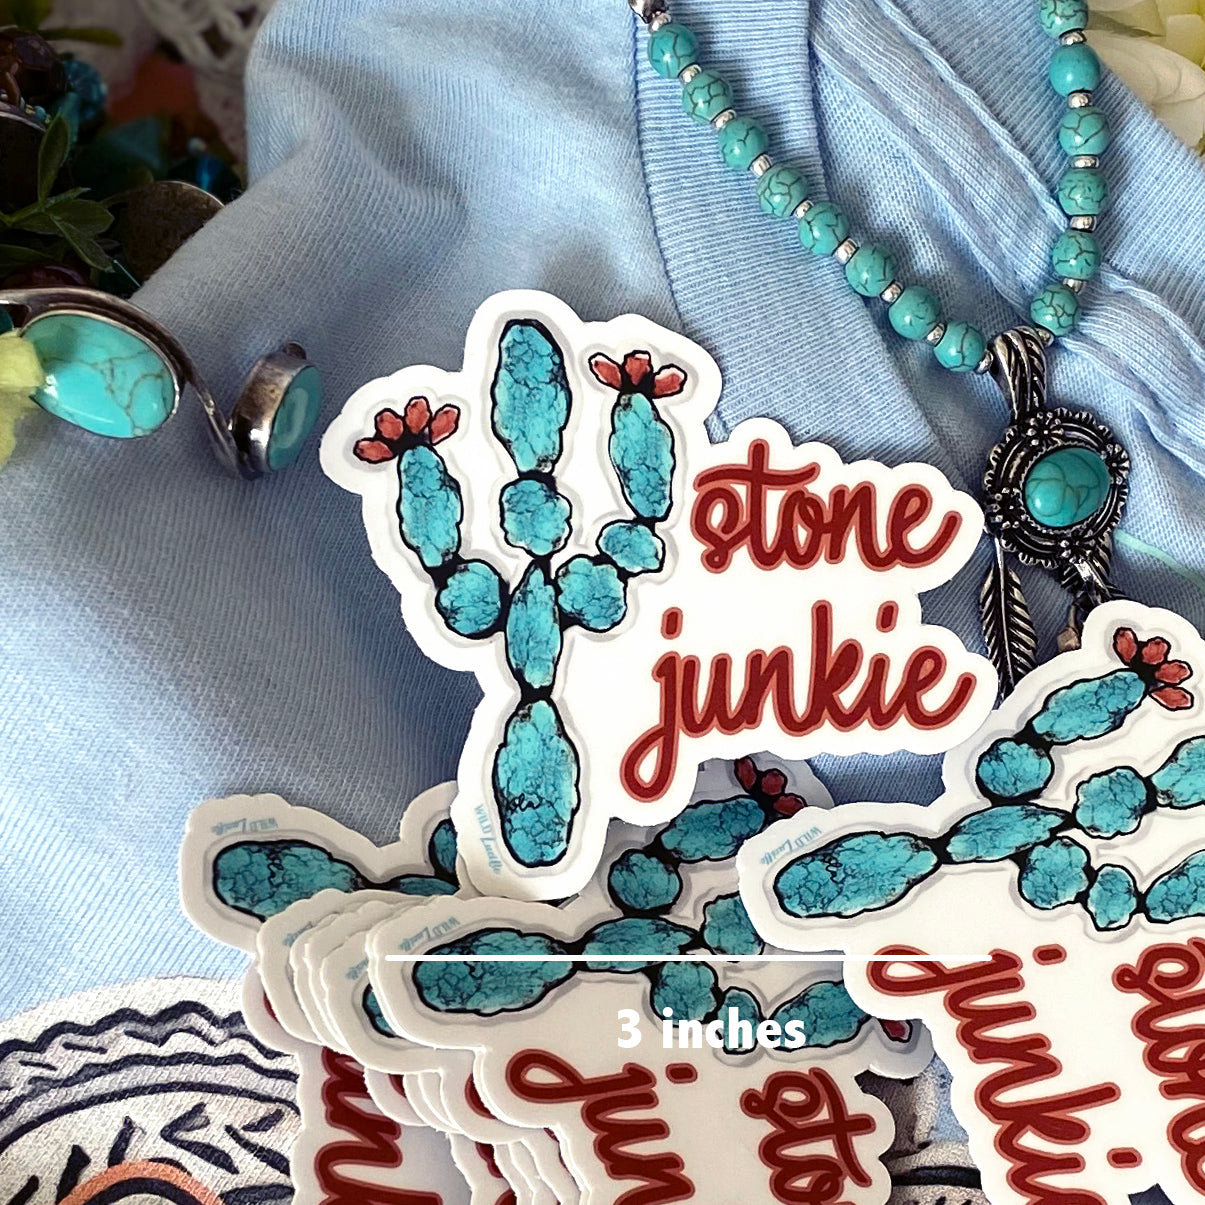 Stone Junkie Turquoise Cactus - Western Decal